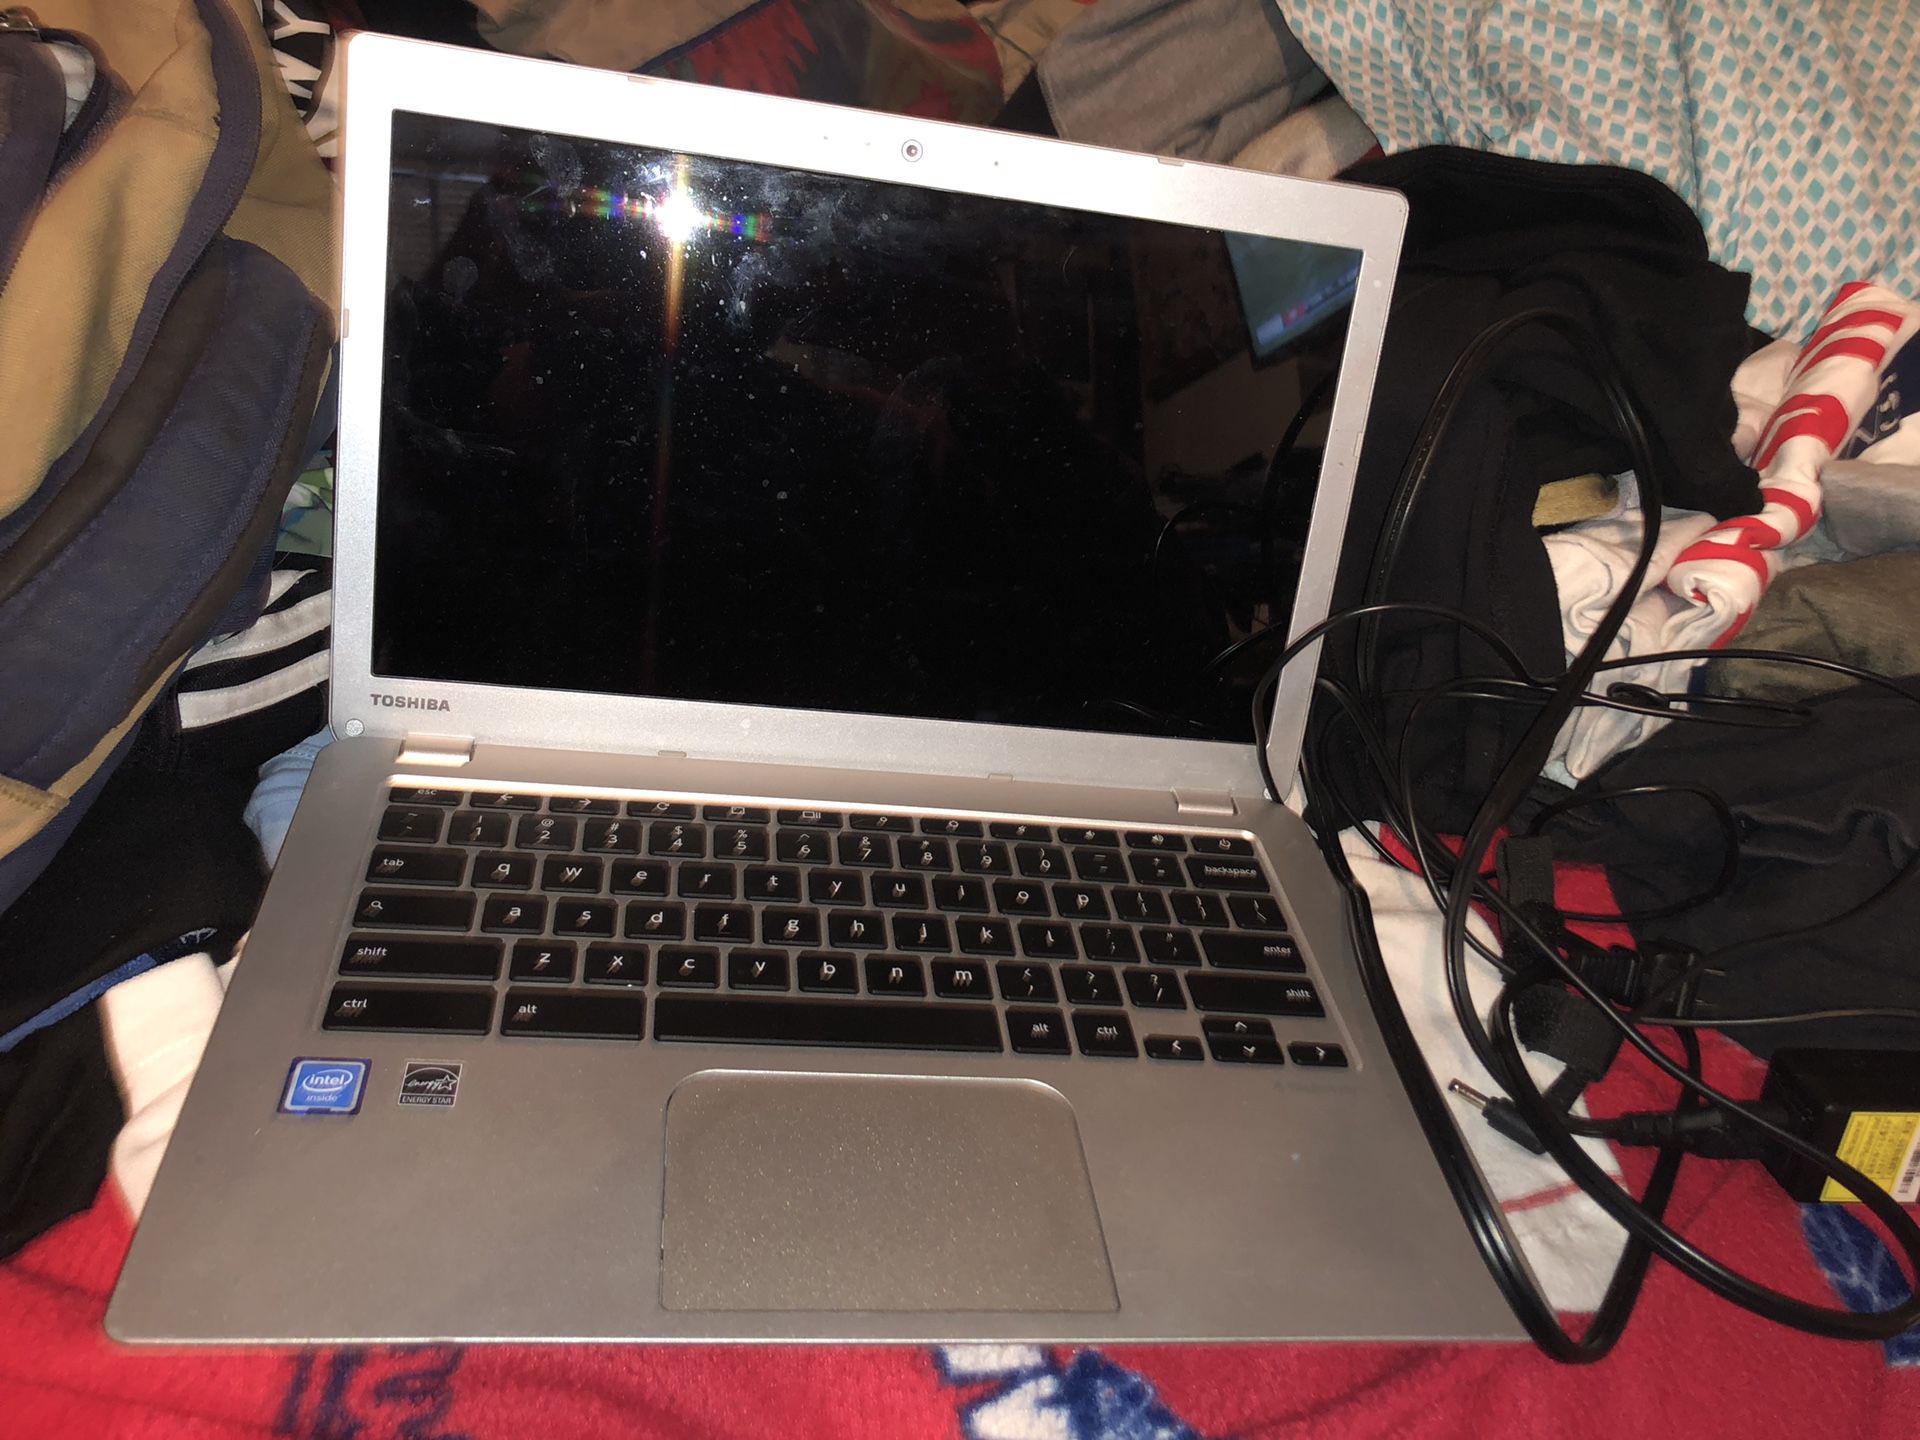 Toshiba Chromebook w/ charger